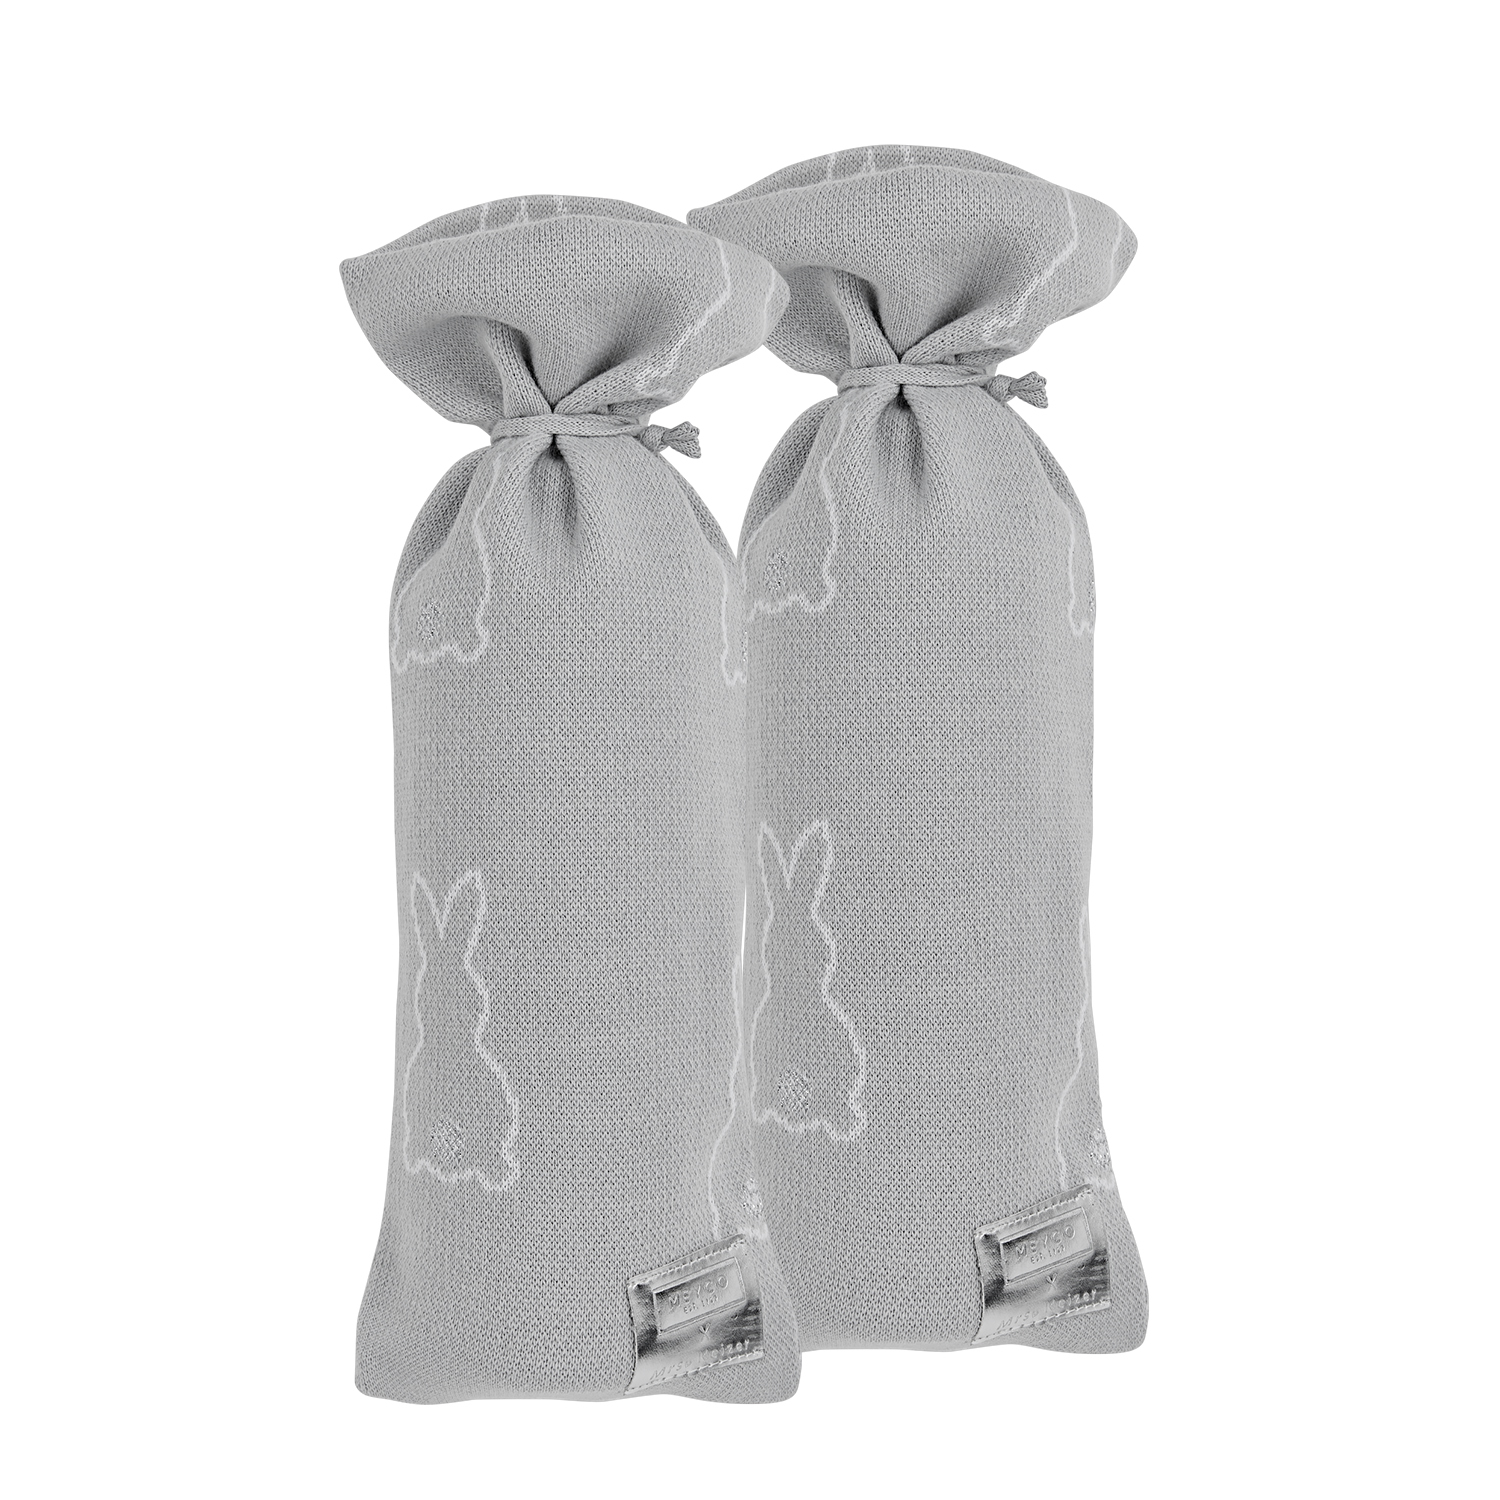 Hot water bottle cover 2-pack Rabbit - silver